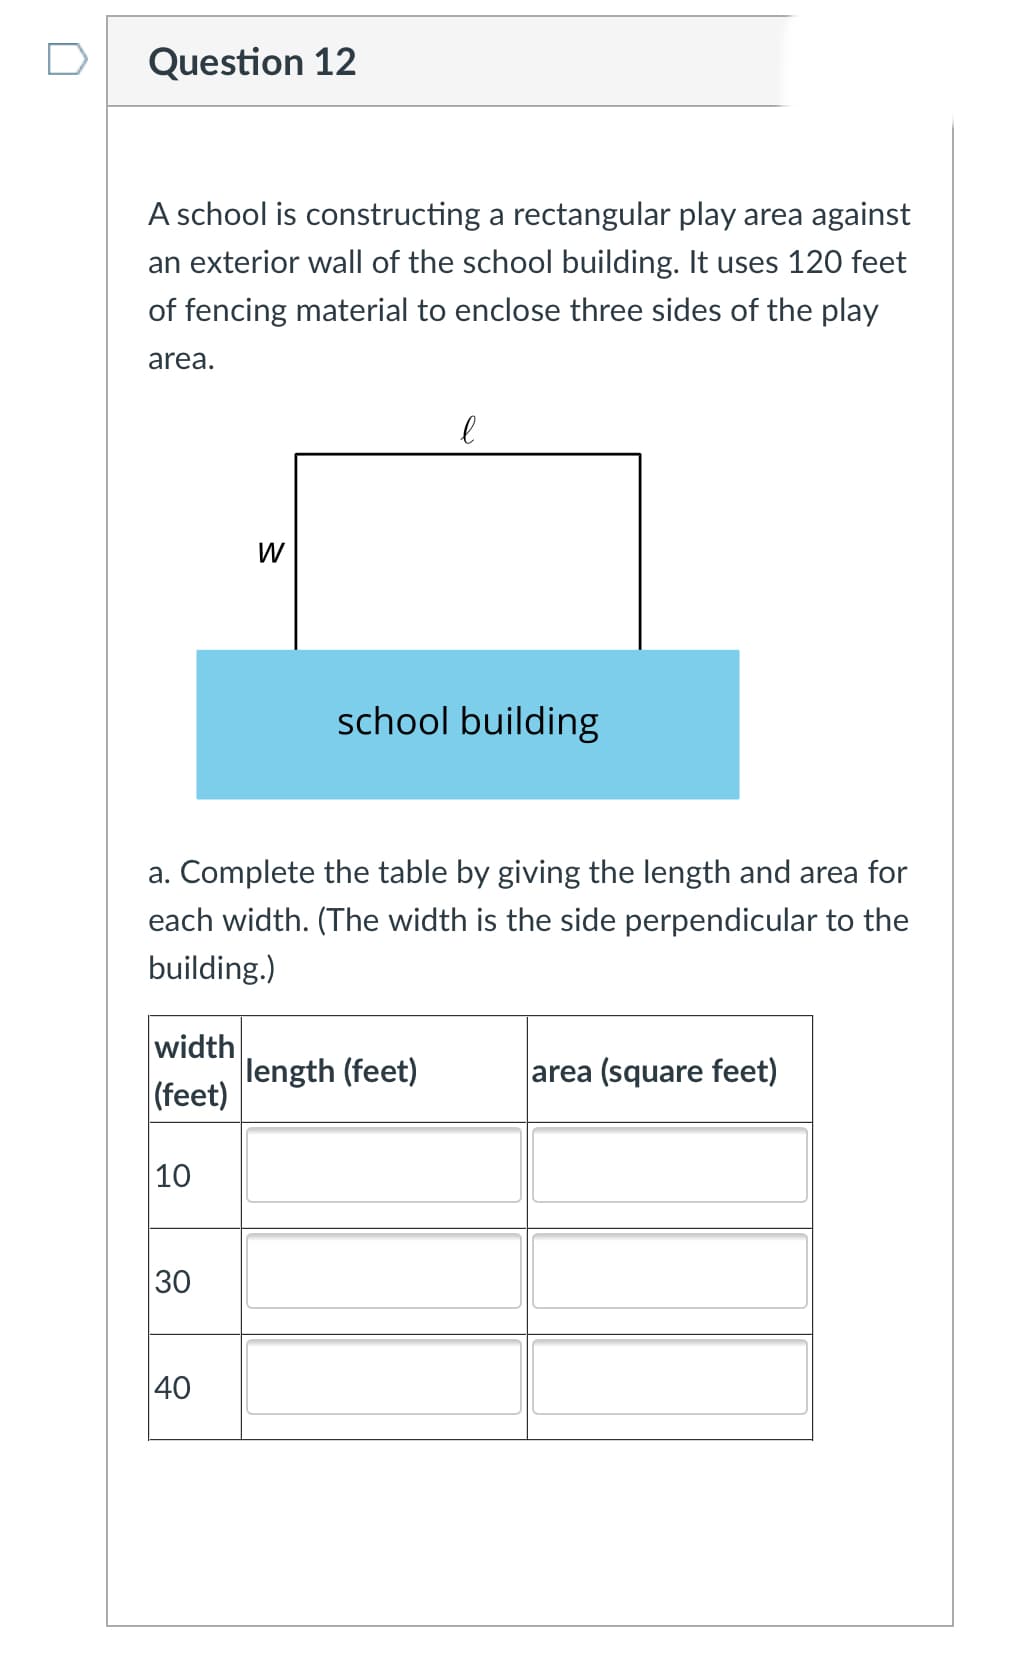 Question 12
A school is constructing a rectangular play area against
an exterior wall of the school building. It uses 120 feet
of fencing material to enclose three sides of the play
area.
W
school building
a. Complete the table by giving the length and area for
each width. (The width is the side perpendicular to the
building.)
width
length (feet)
(feet)
area (square feet)
10
30
40
